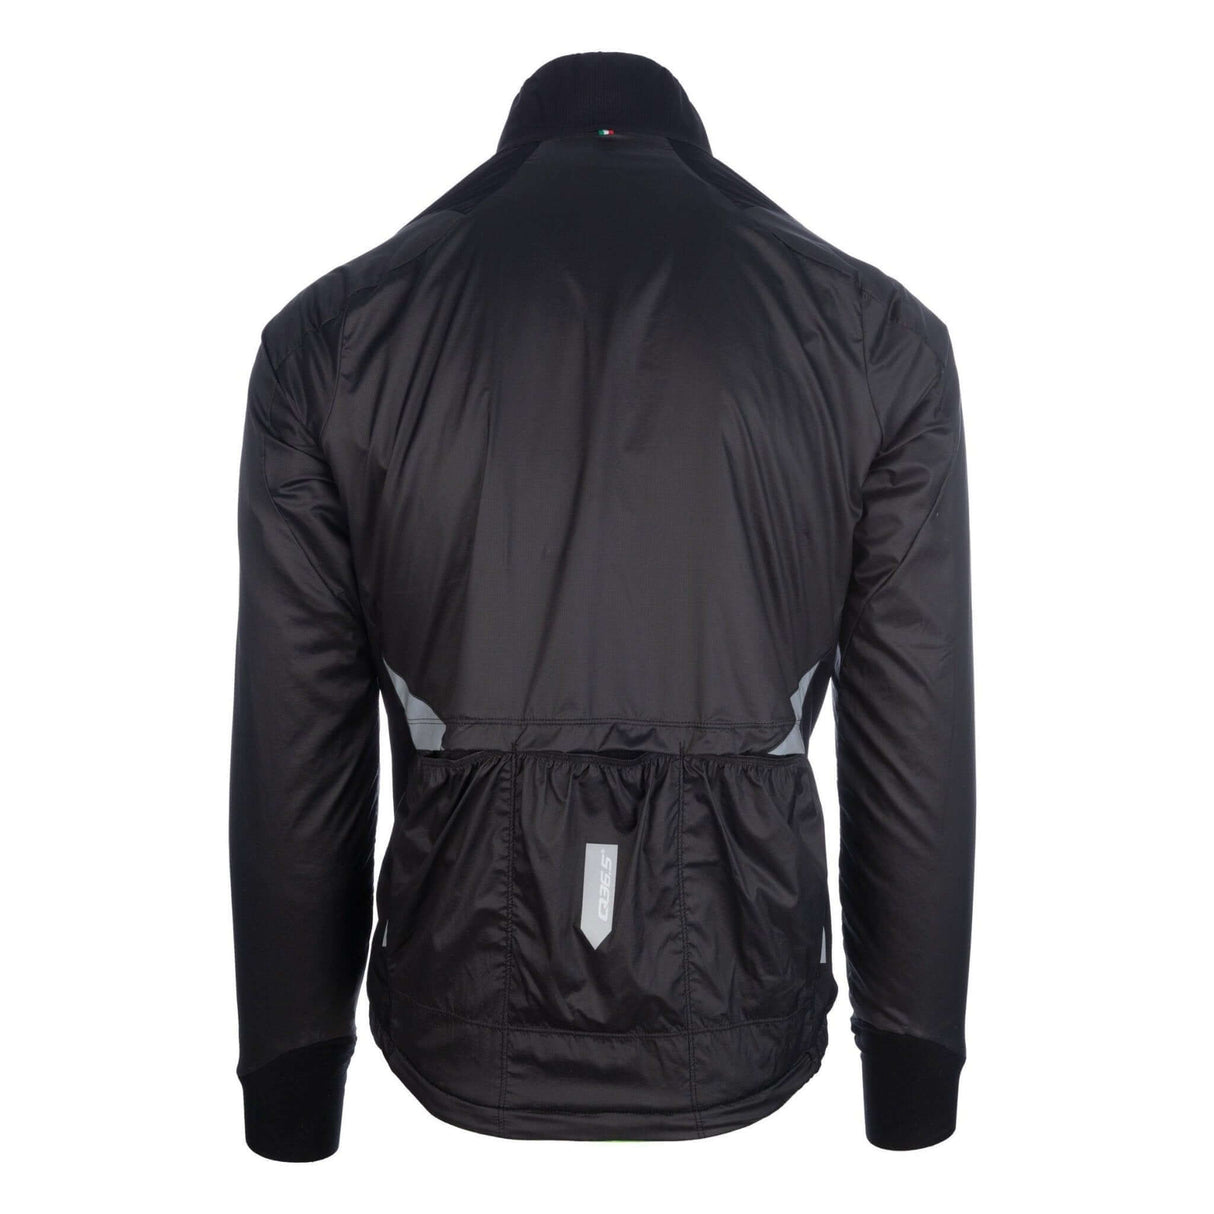 Q36.5 Adventure Winter Cycling Jacket | Strictly Bicycles